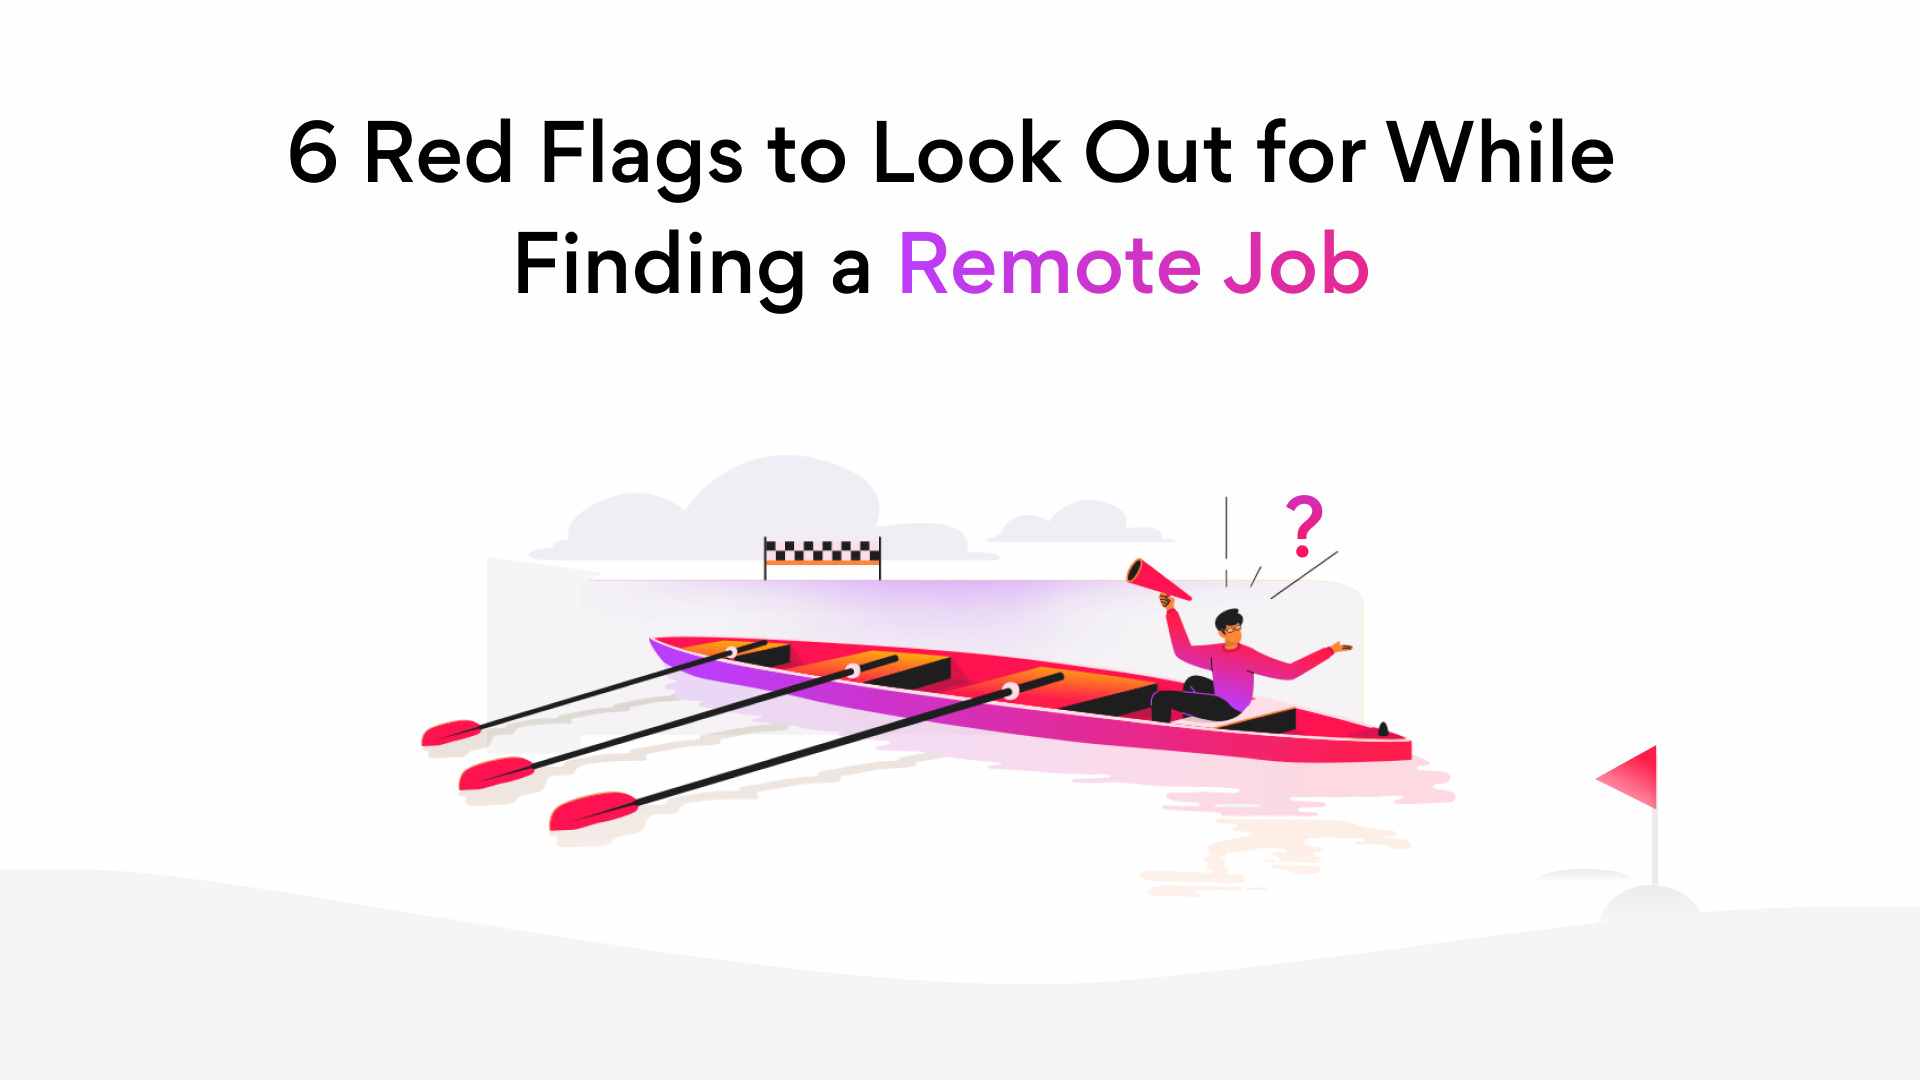 Looking for a Remote Job? Watch Out for These 6 Red Flags!